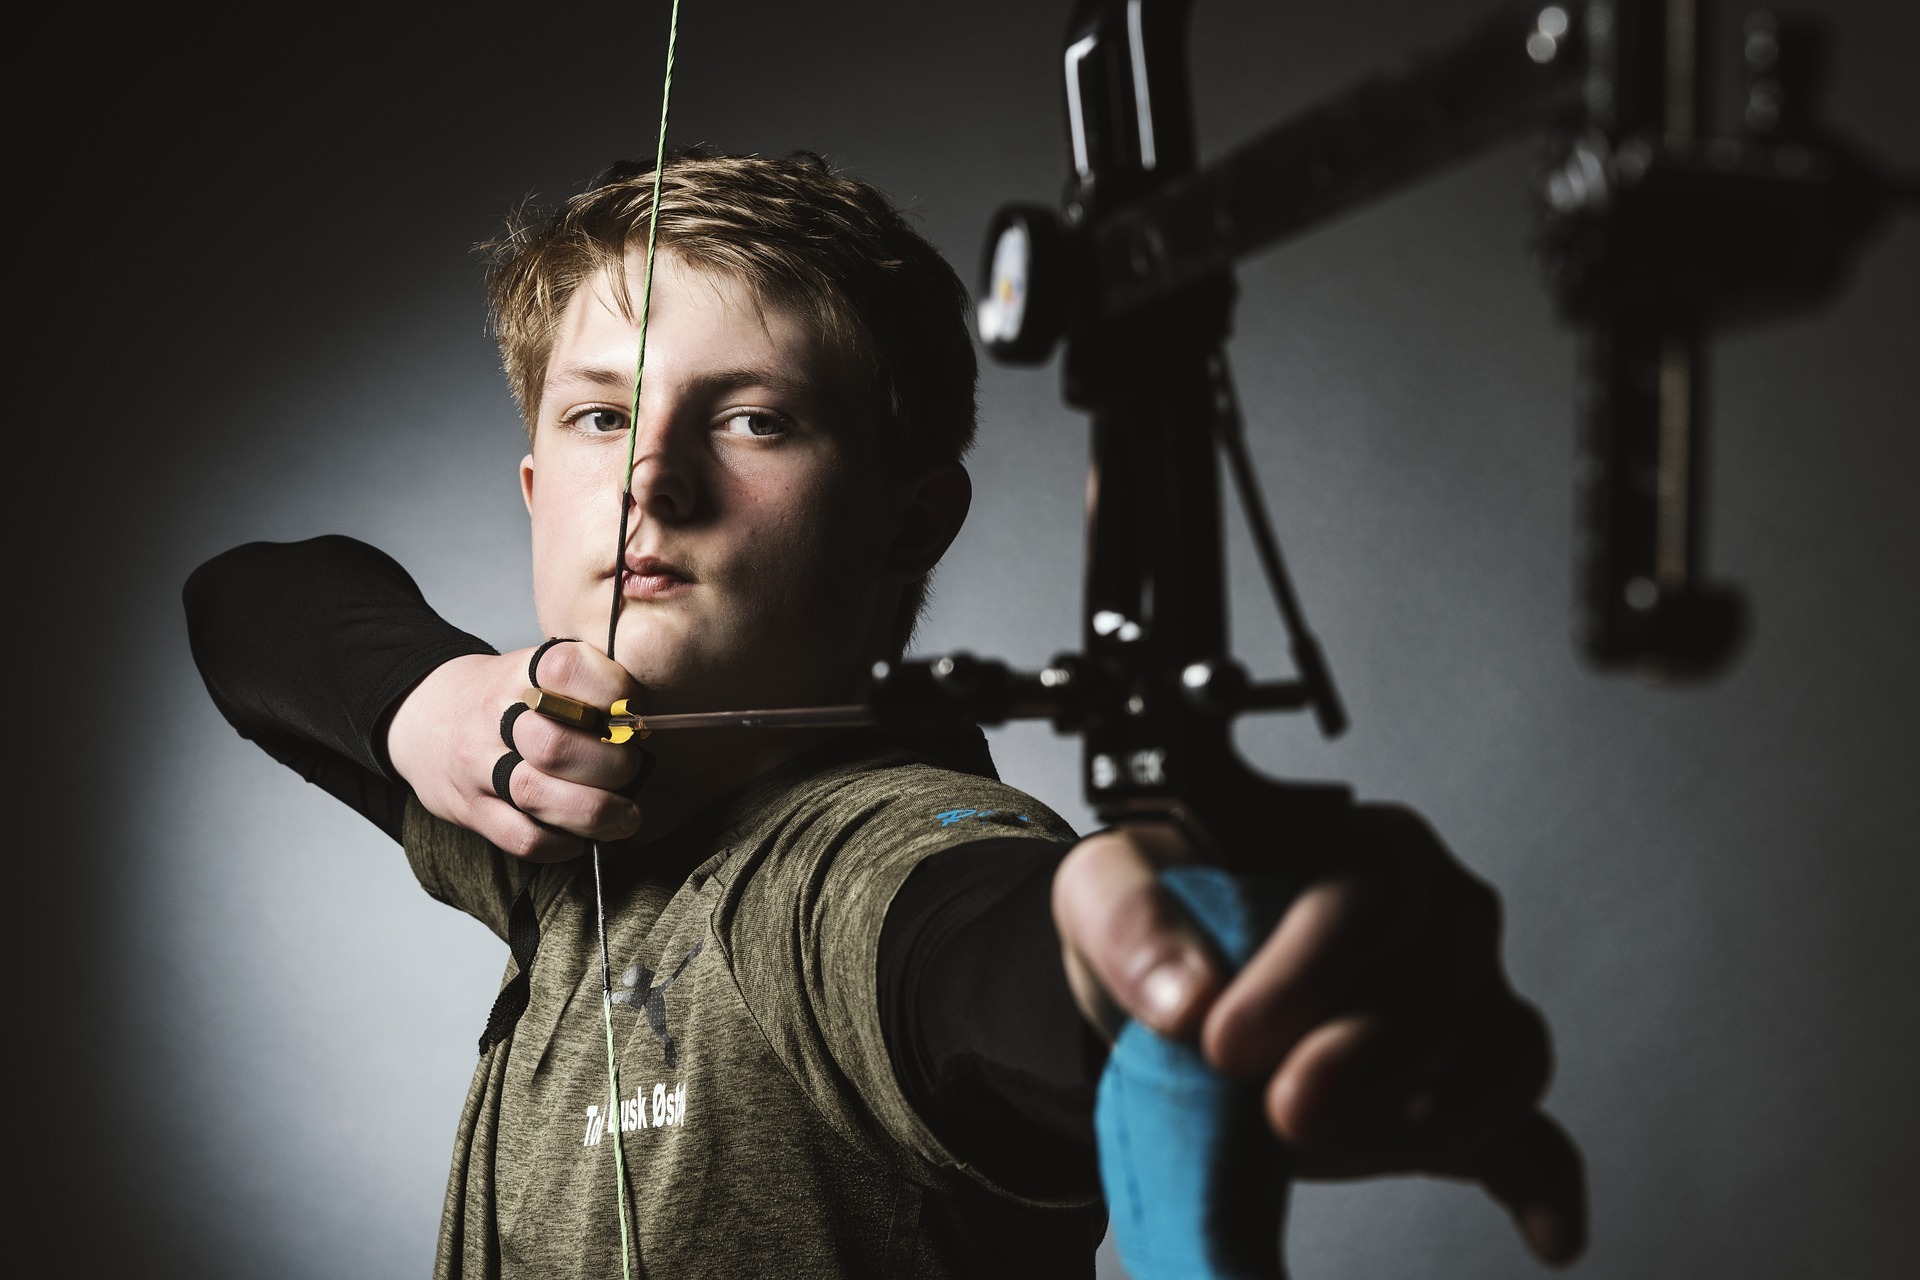 archery insurance archery bow insurance archery club insurance archery injury insurance. Their club has signed up for an affiliate sports club insurance